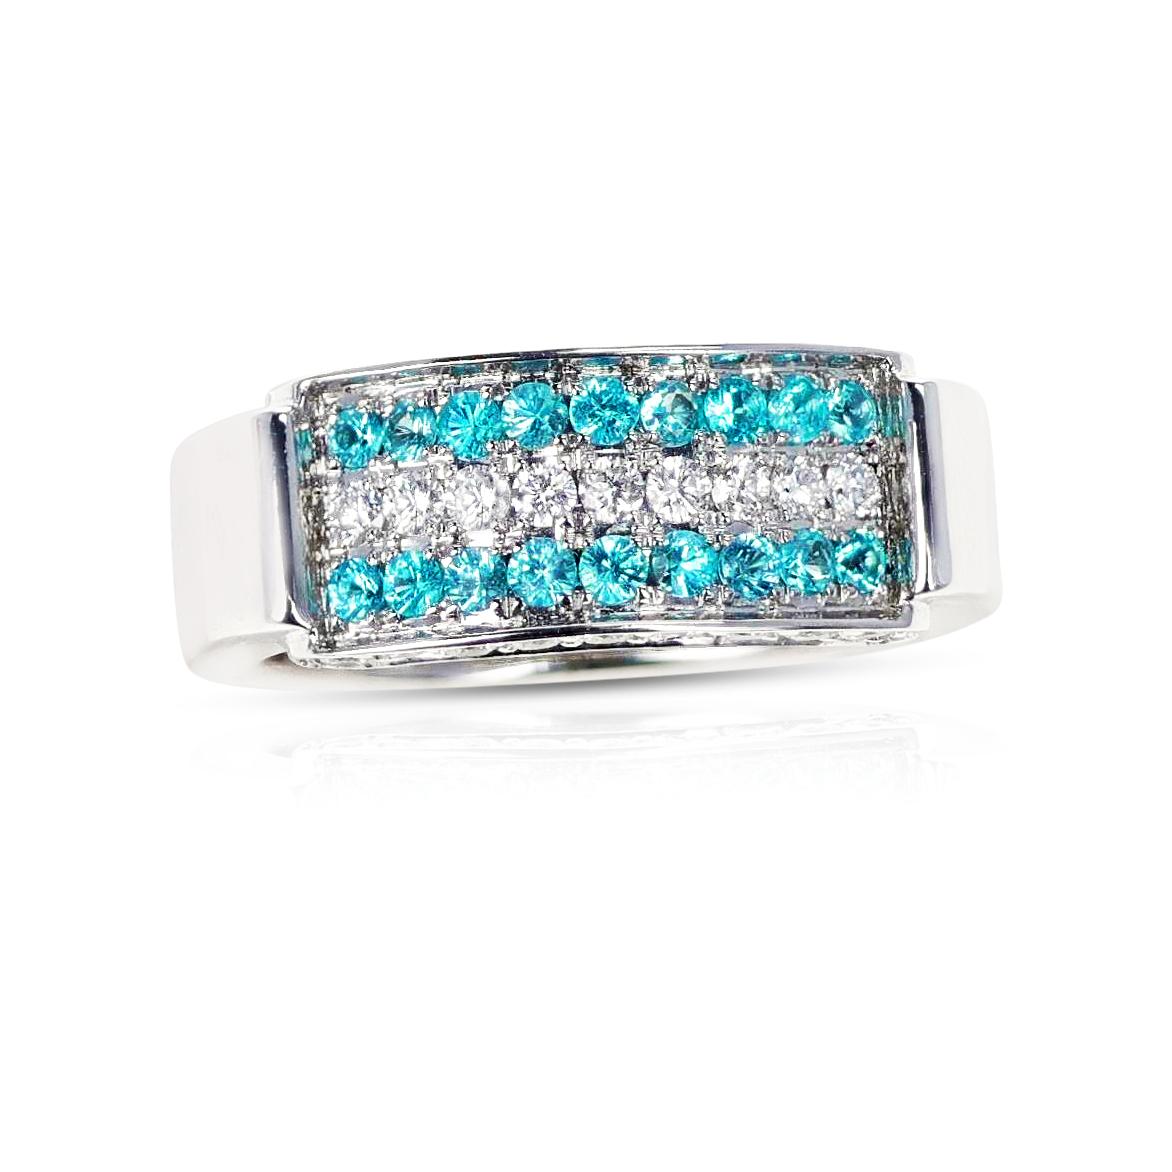 A Three Row Brazilian Paraiba and Diamond Wedding Band made in 18 karat Yellow Gold. The Paraiba weighs 0.36 carats and the diamonds weigh 0.60 carats. The total weight of the 9.31 grams. The ring size is US 6.75. 